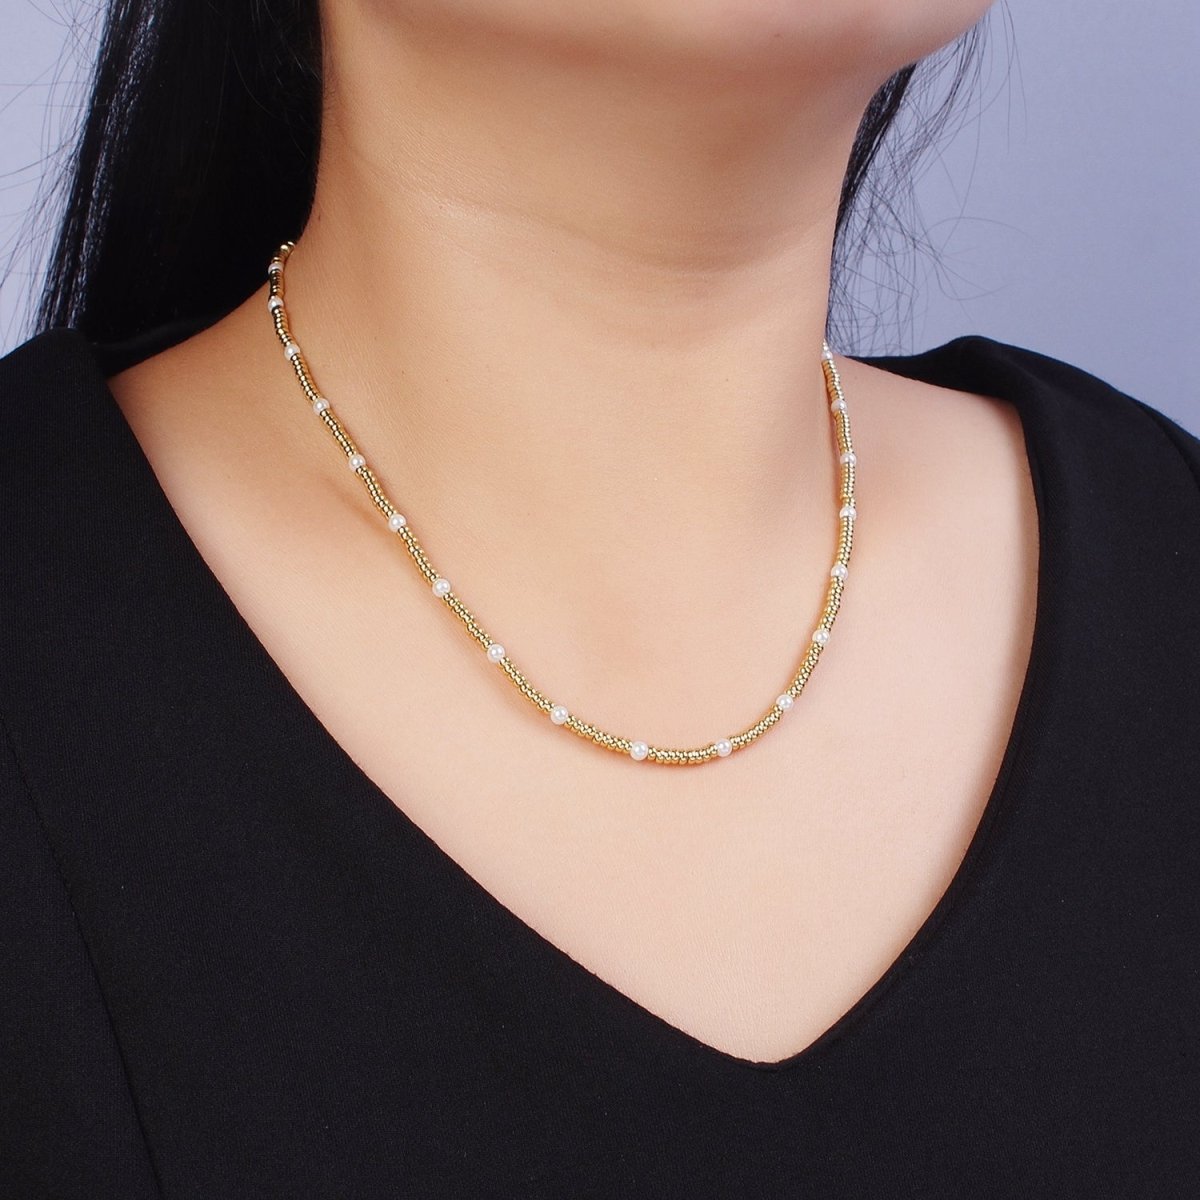 24K Gold Filled 3mm Spacer Bead Shell Pearl 16 Inch Choker Necklace | WA-1281 Clearance Pricing - DLUXCA